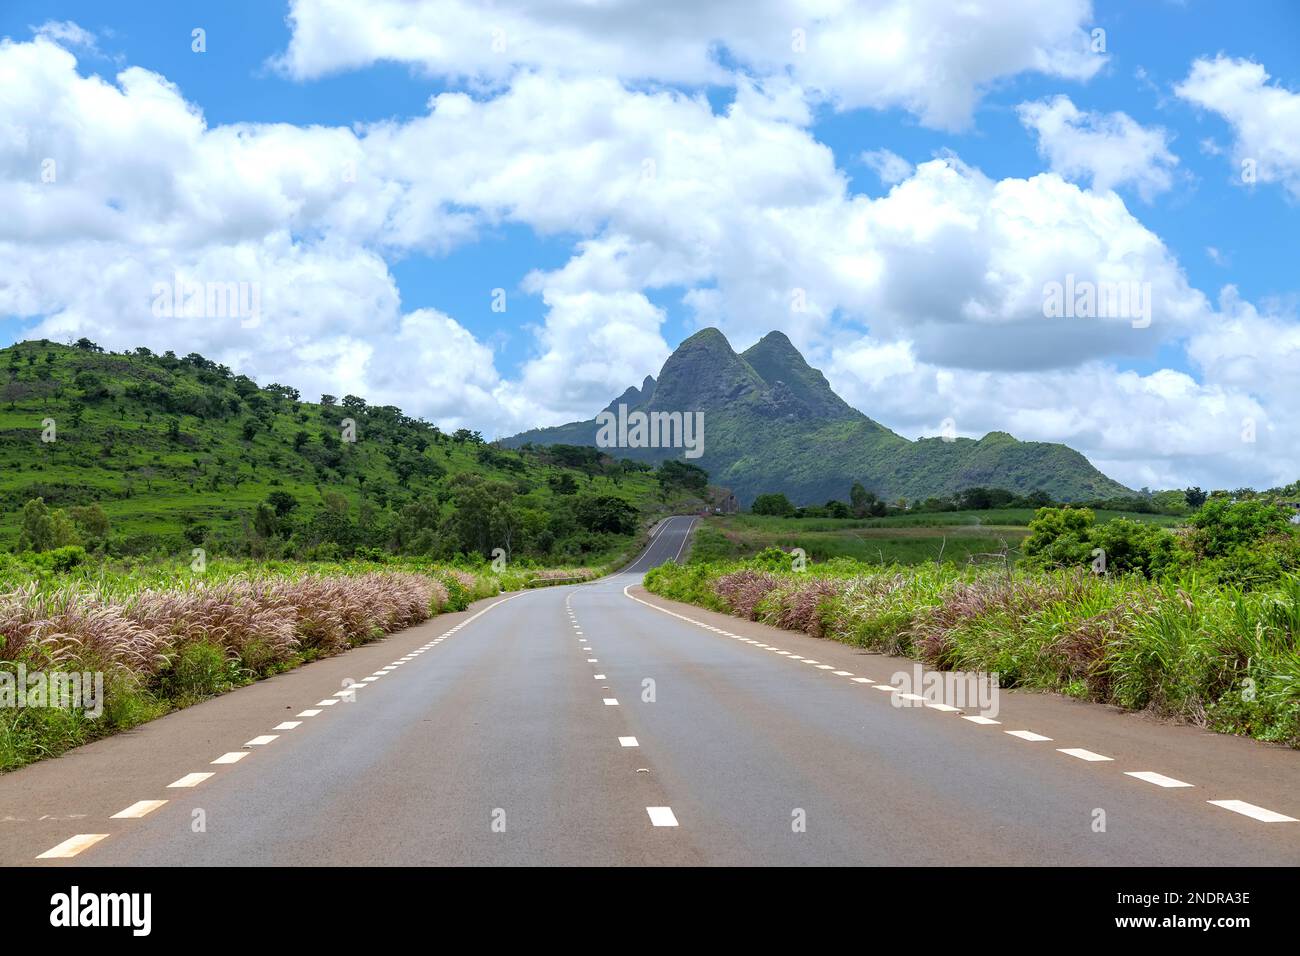 Asphalted road to the mountain against blue cloudy sky. Stock Photo